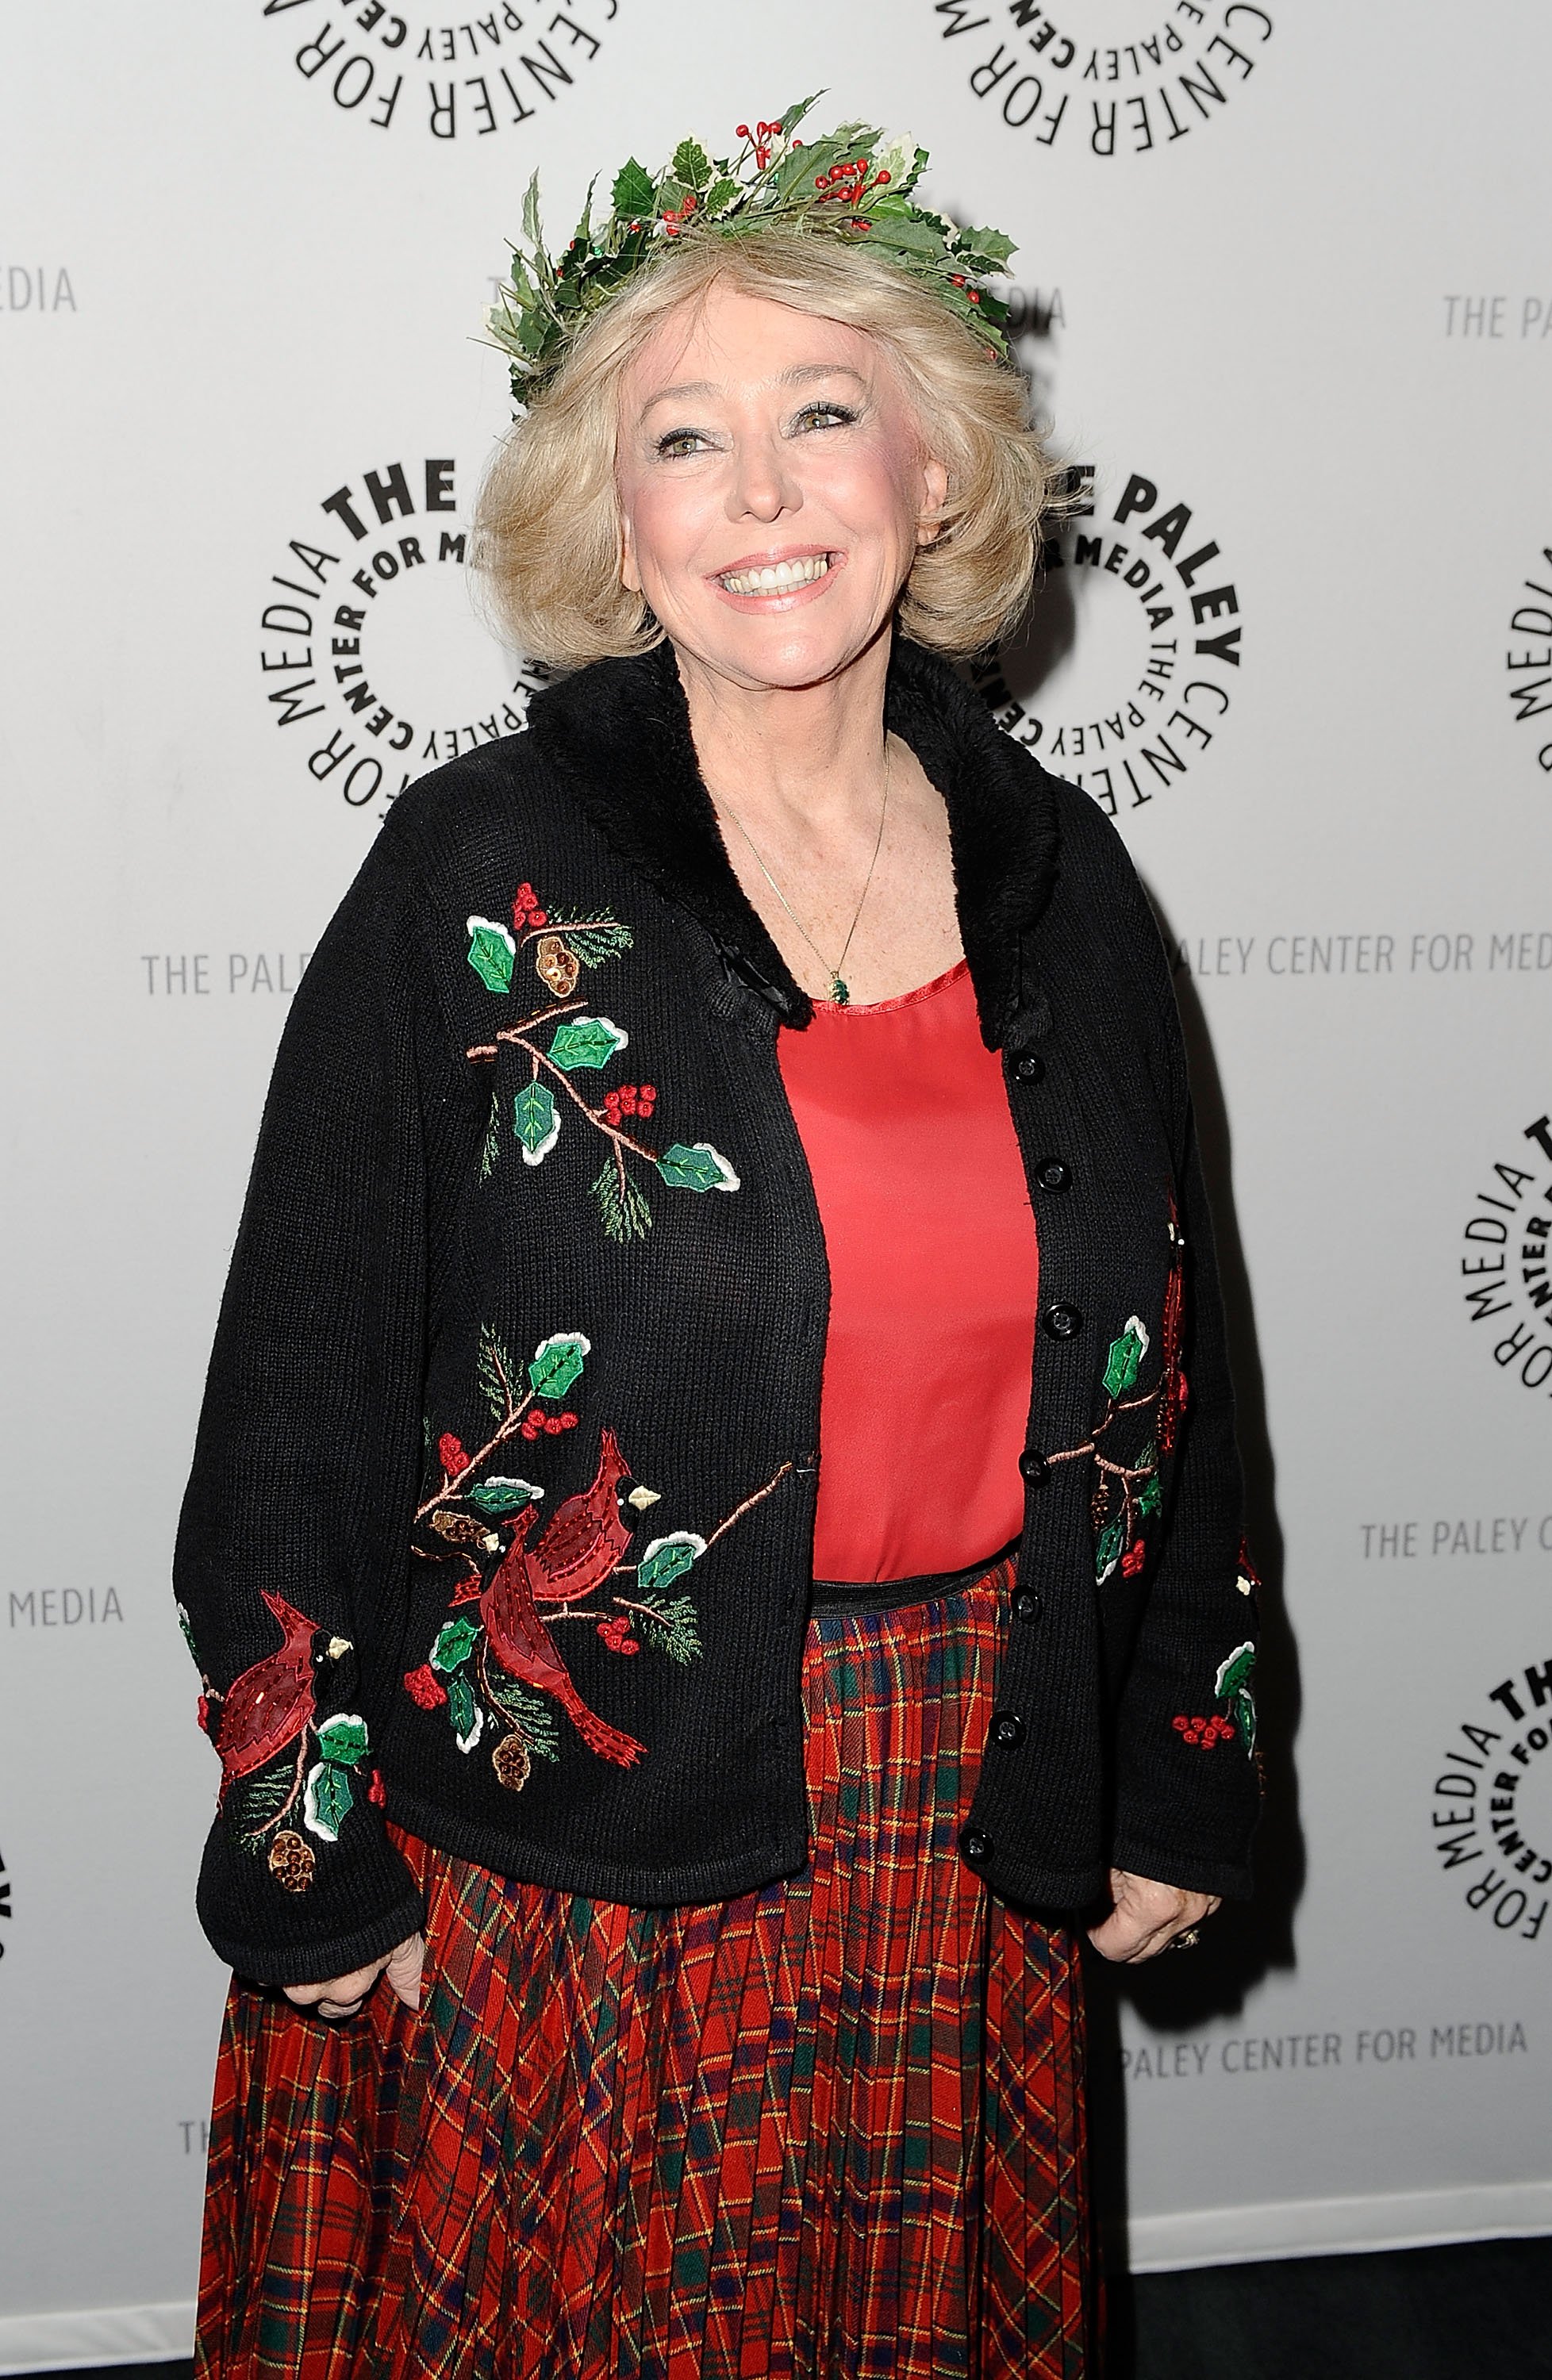 Tina Cole attends the Paley Center for Media Presentation of "Christmas with the King Family" at the Paley Center on December 20, 2009 in Beverly Hills, California. | Photo: Getty Images